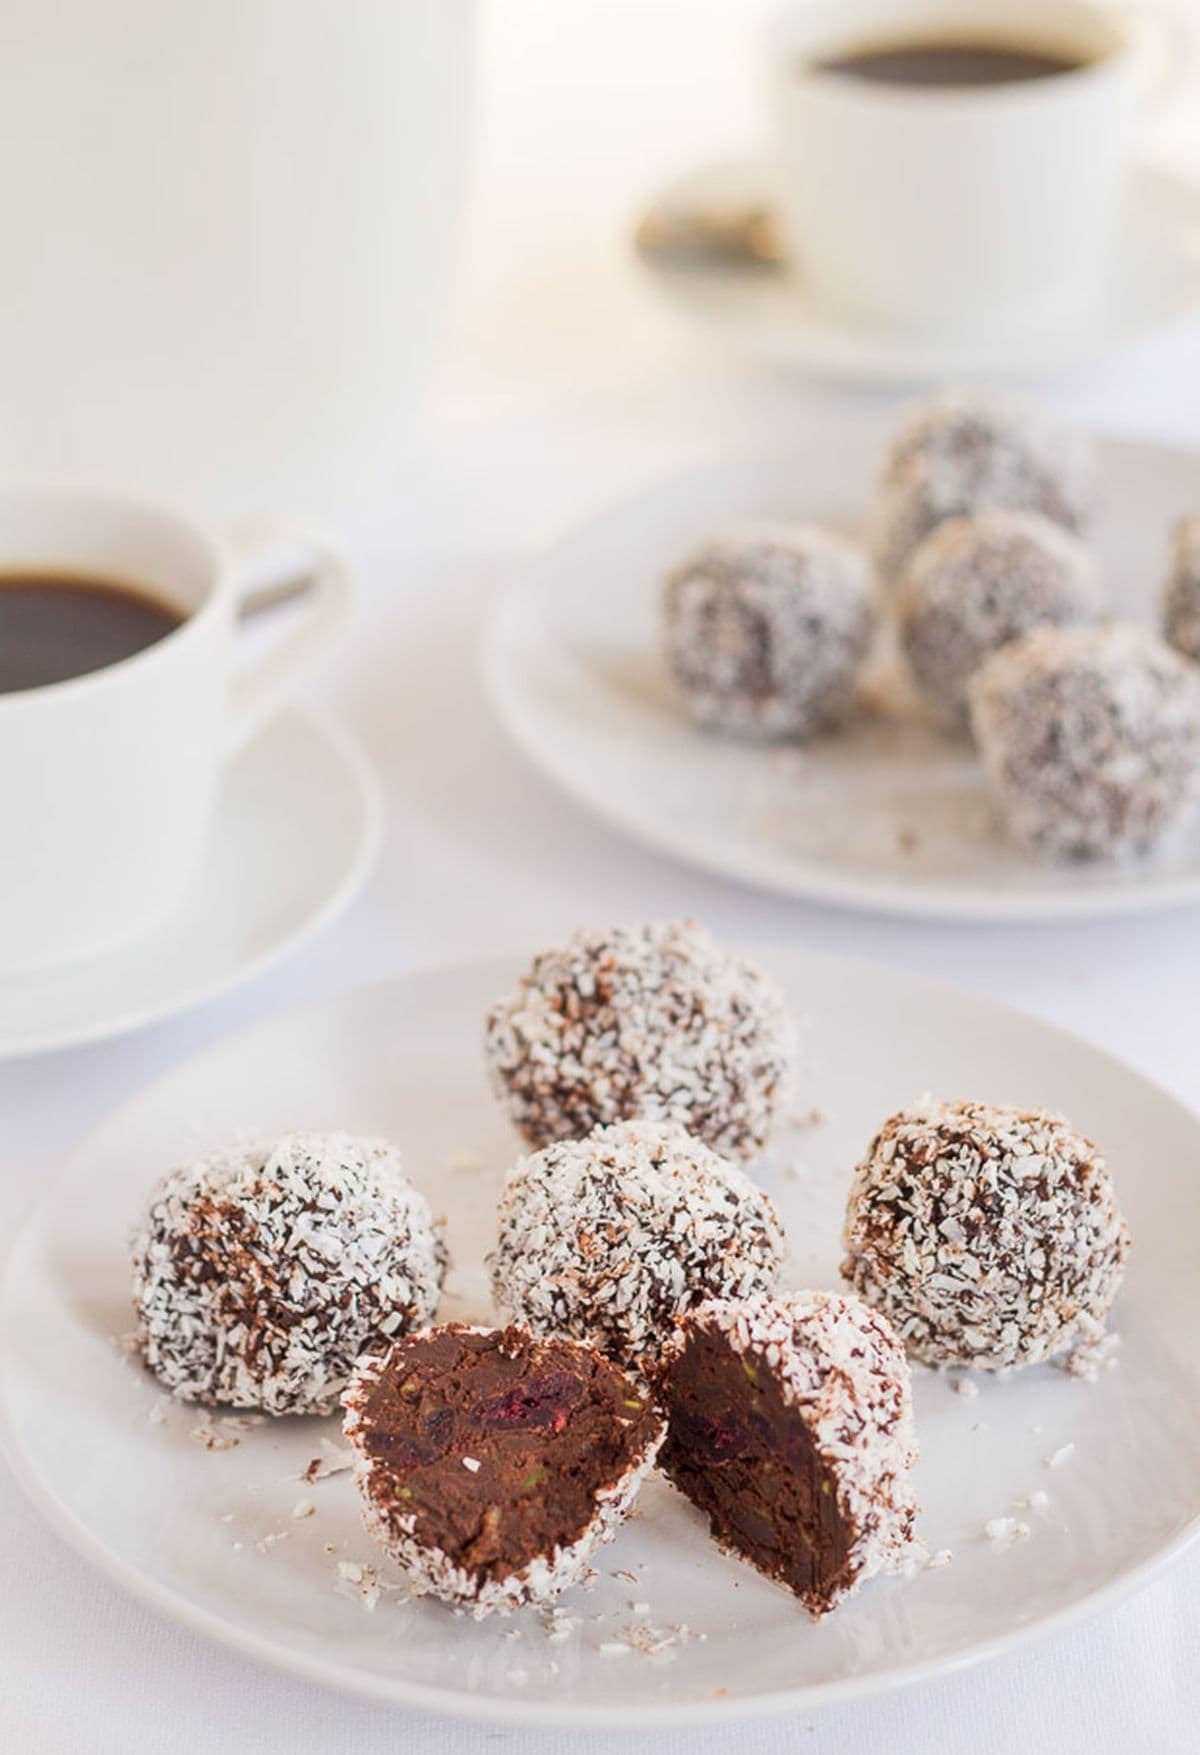 A plate of chocolate cranberry truffles with one cut in half. Another plate in the background as well as two cups of coffee.